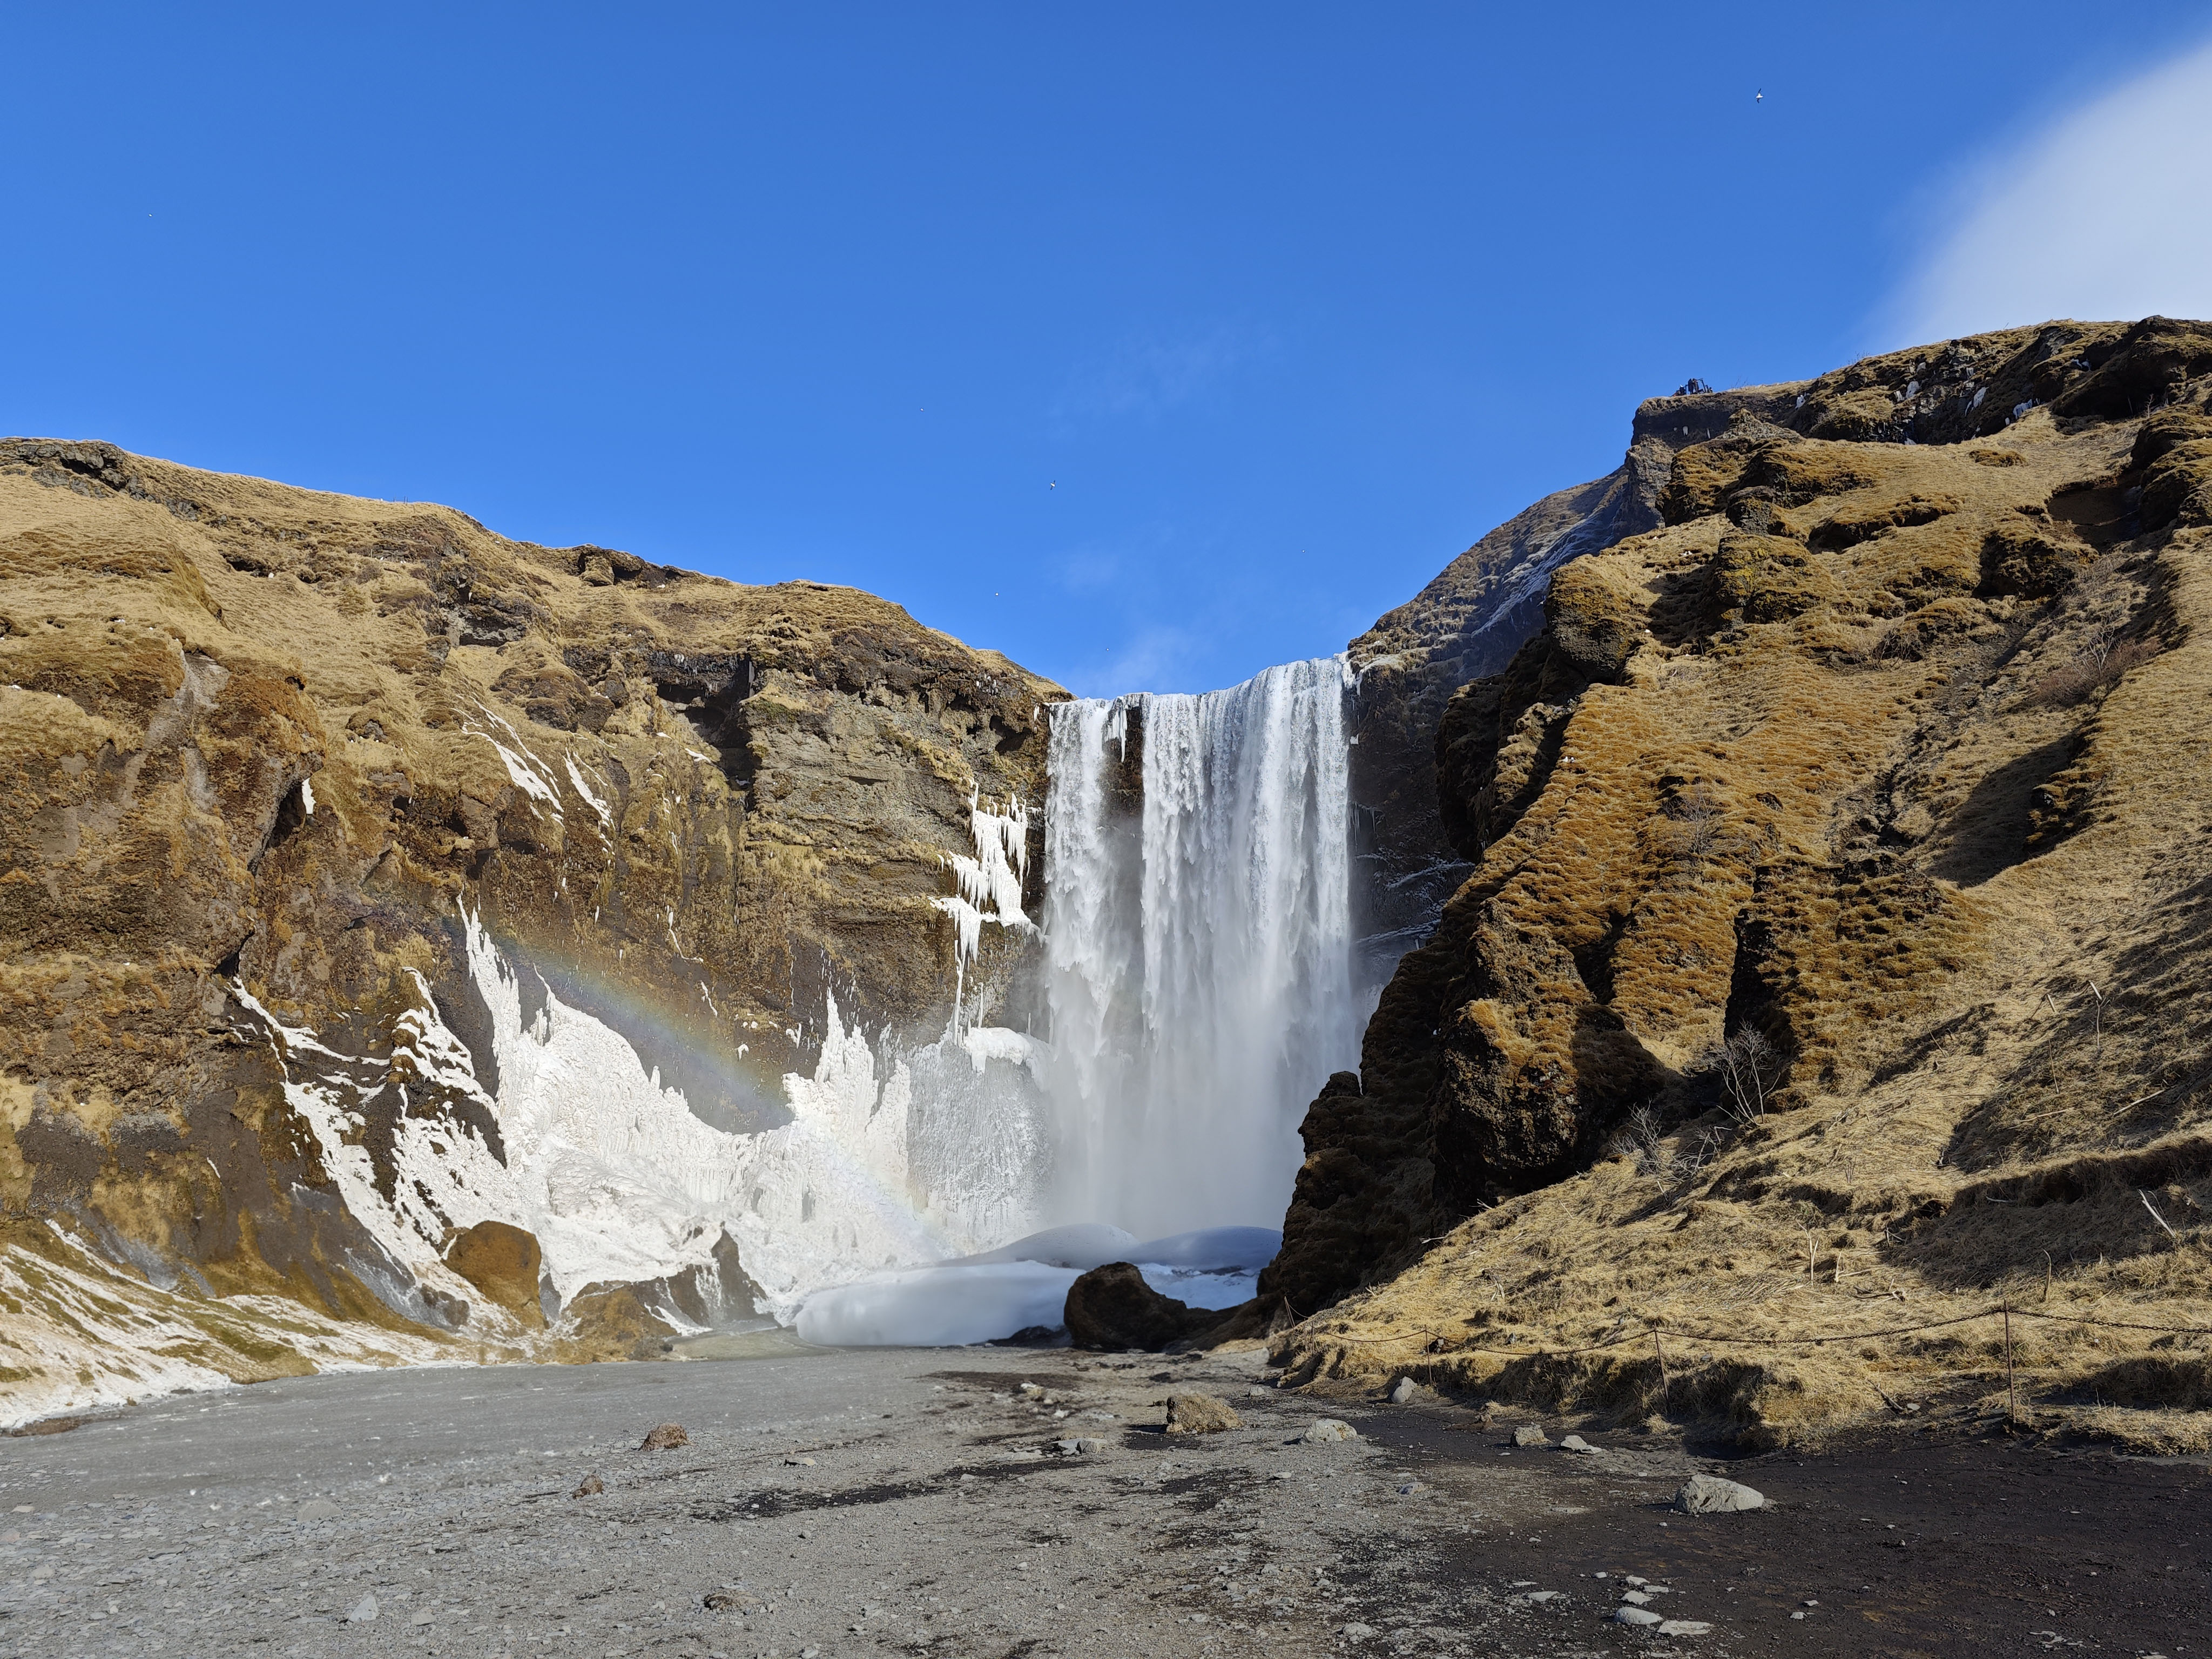 Photo of Skogafoss with people removed with generative fill.